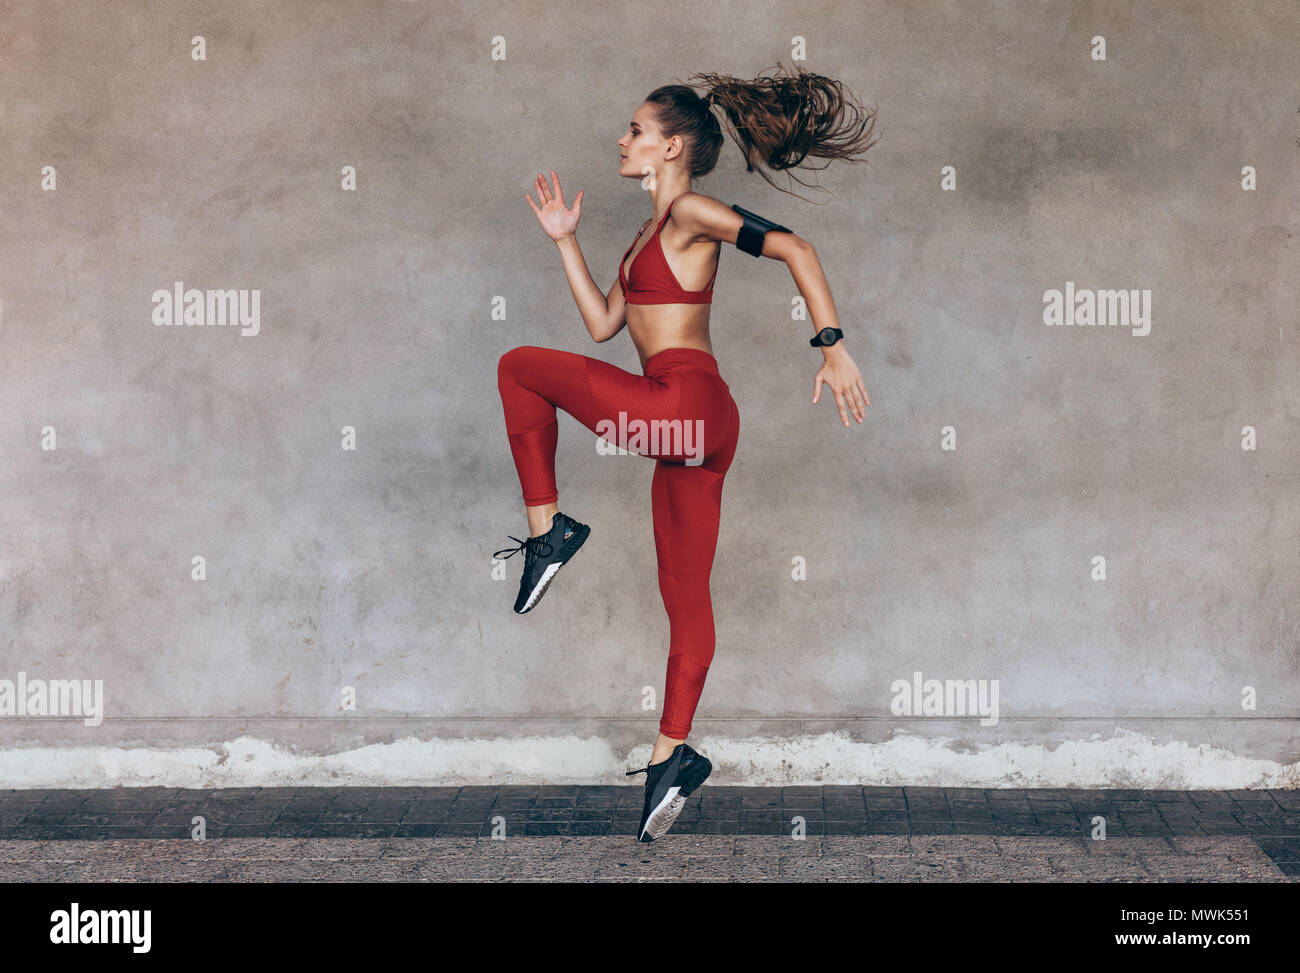 Sportswoman jumping and stretching. Full length of healthy female exercising and jumping outdoors. Stock Photo